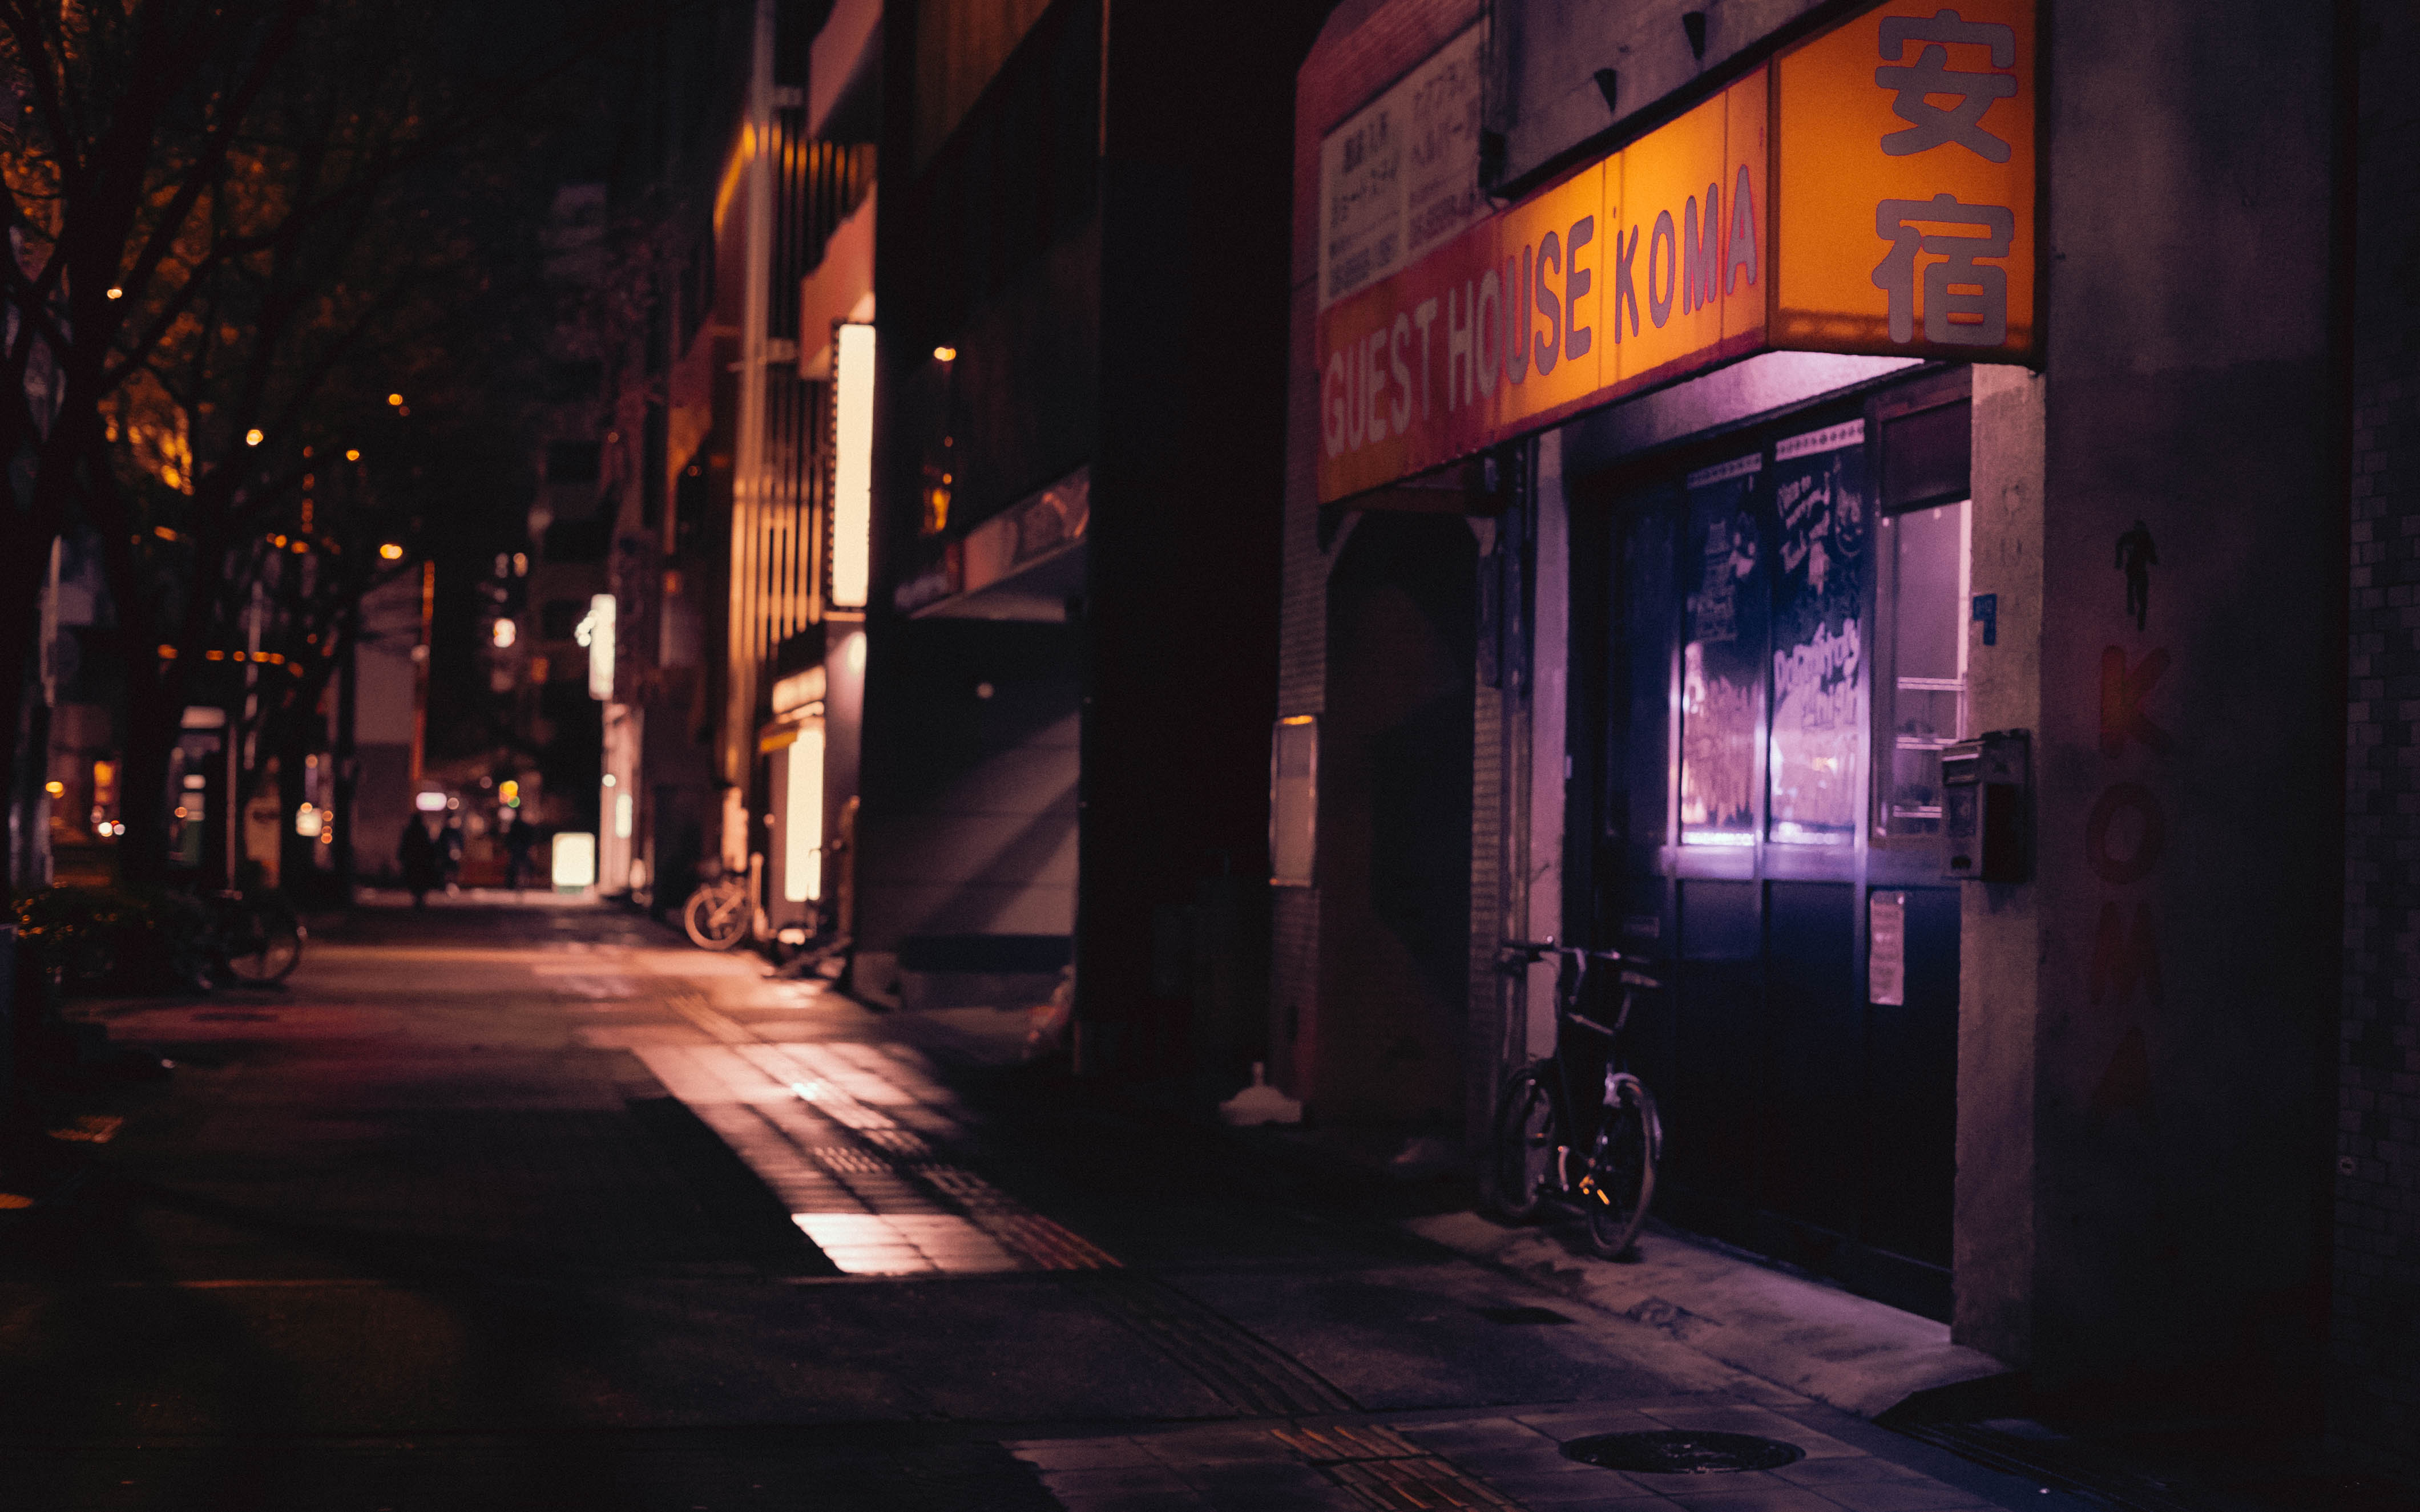 Nightscapes in Tokyo